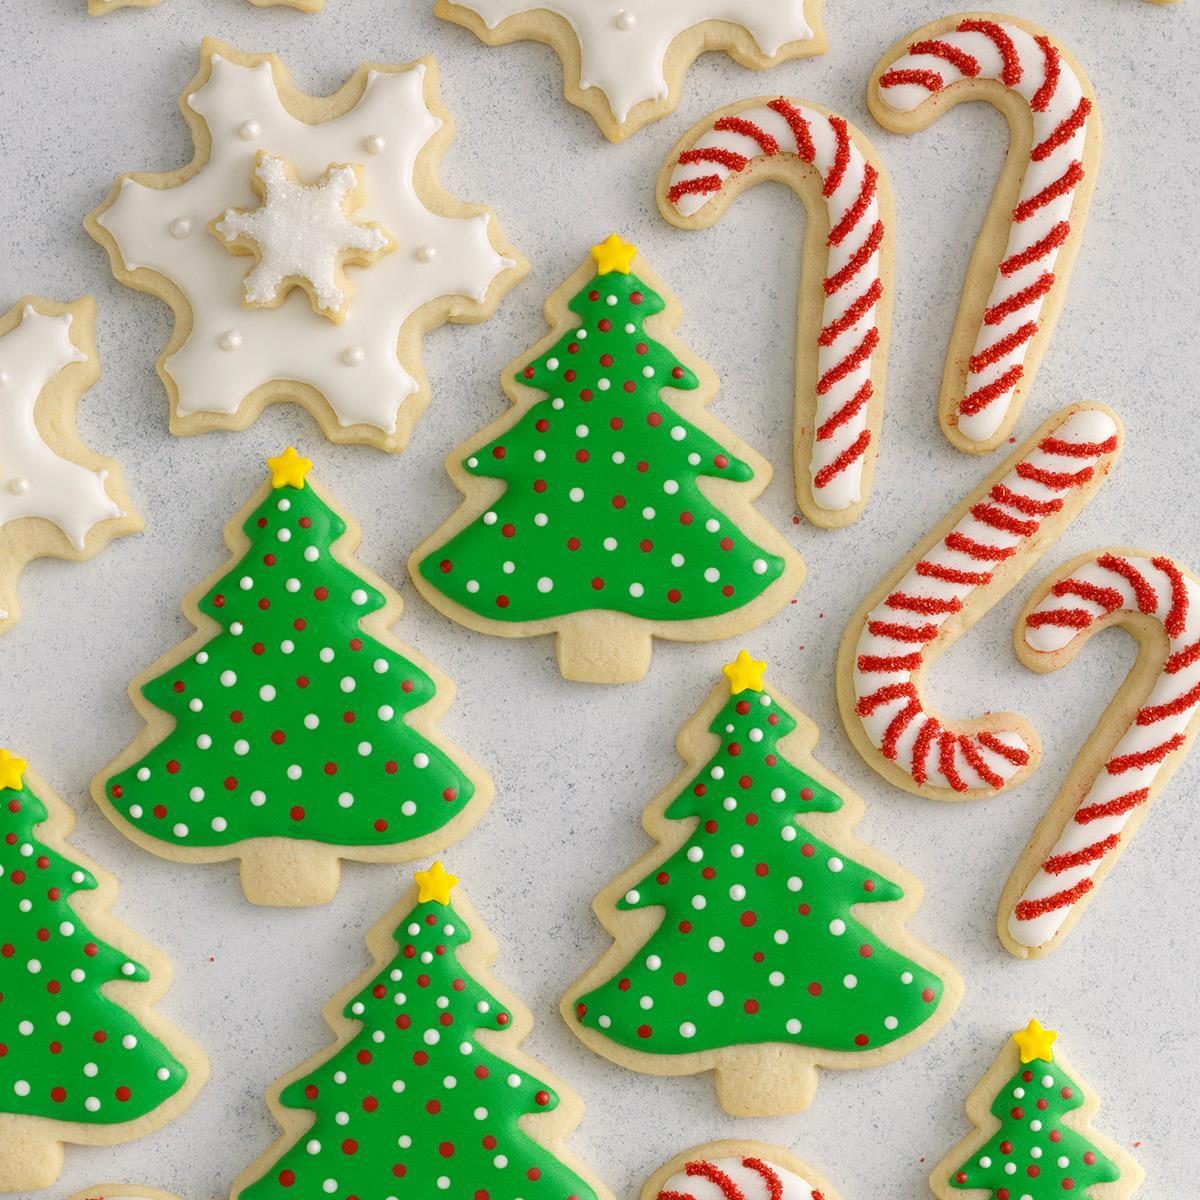 Creatice Christmas Sugar Cookie Decorating Ideas for Small Space